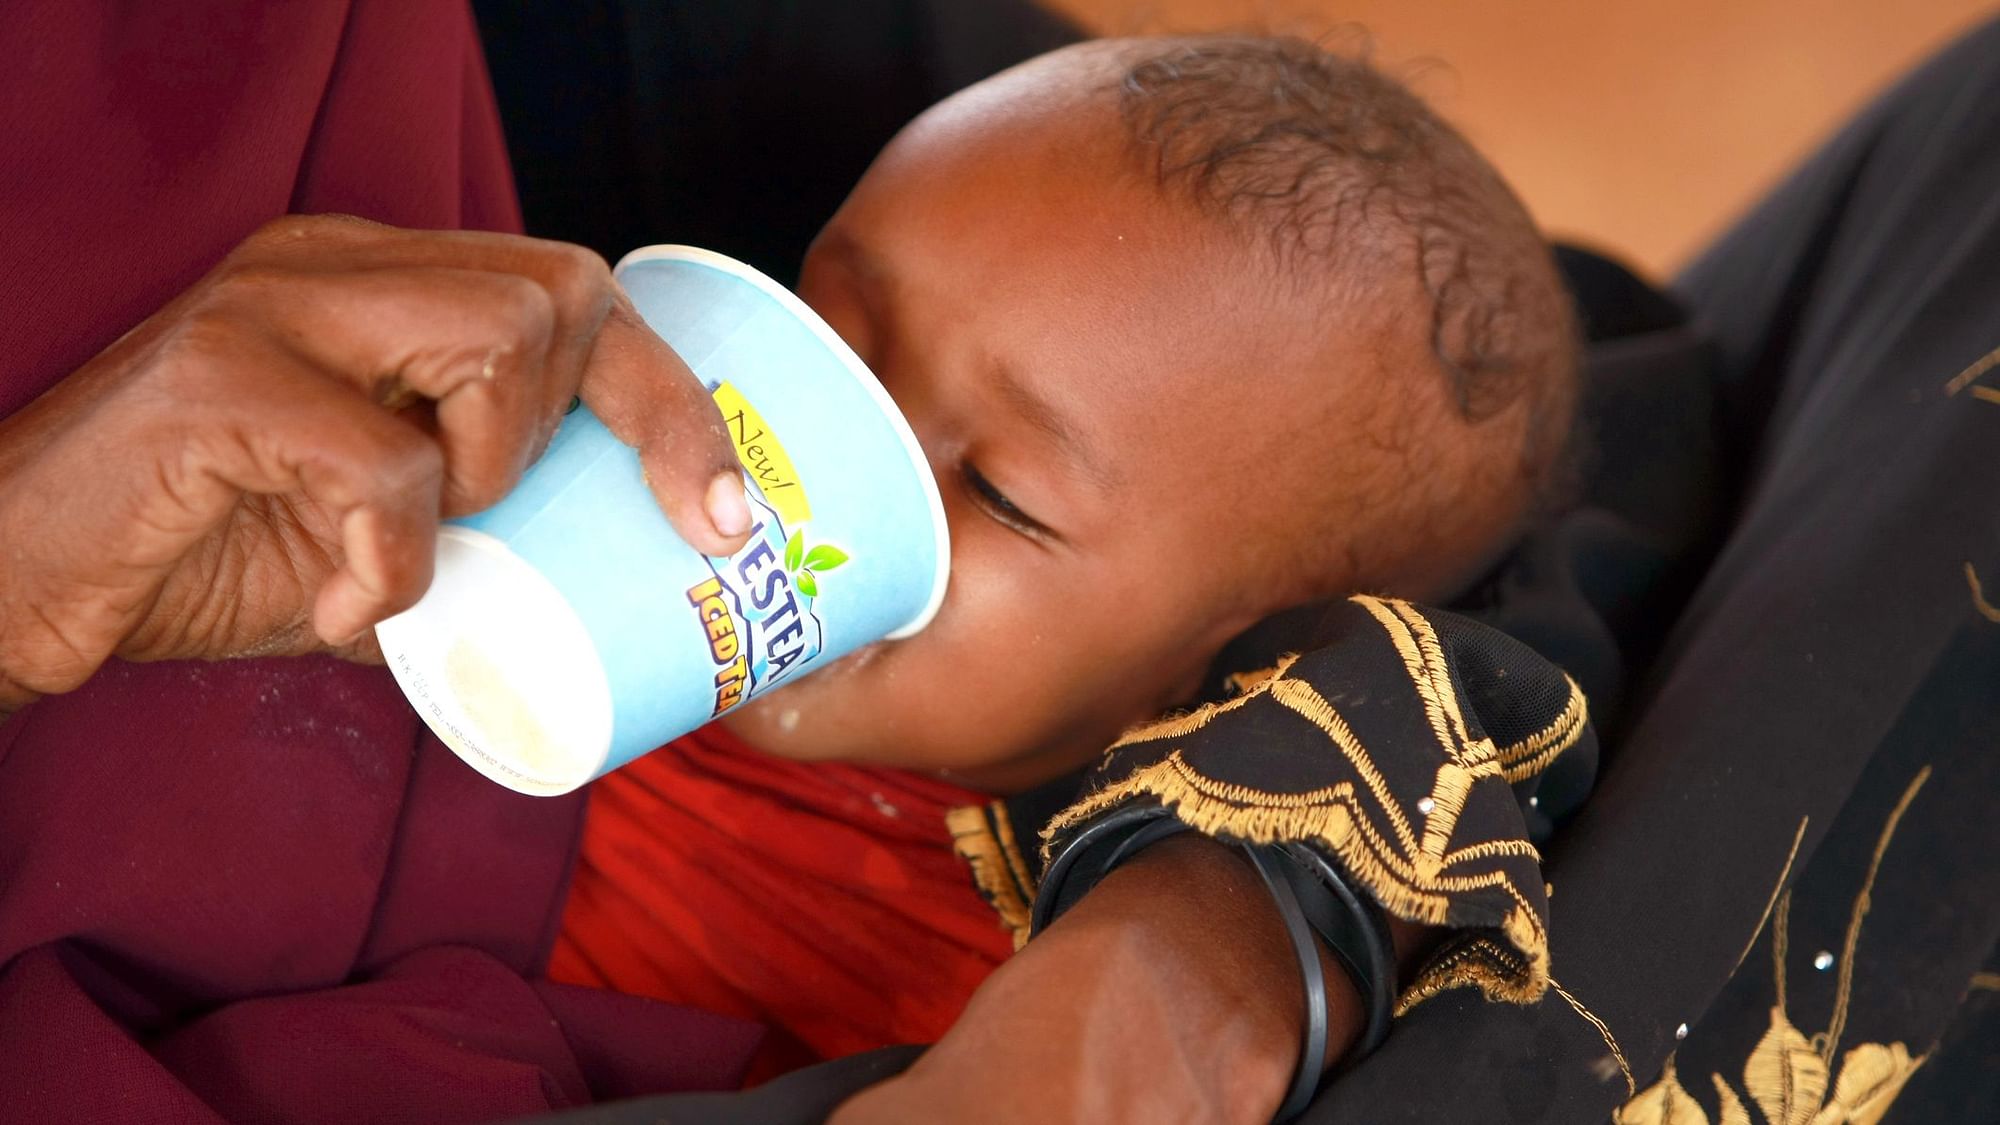 UNICEF report shows 1 in 3 Children around the world are malnourished